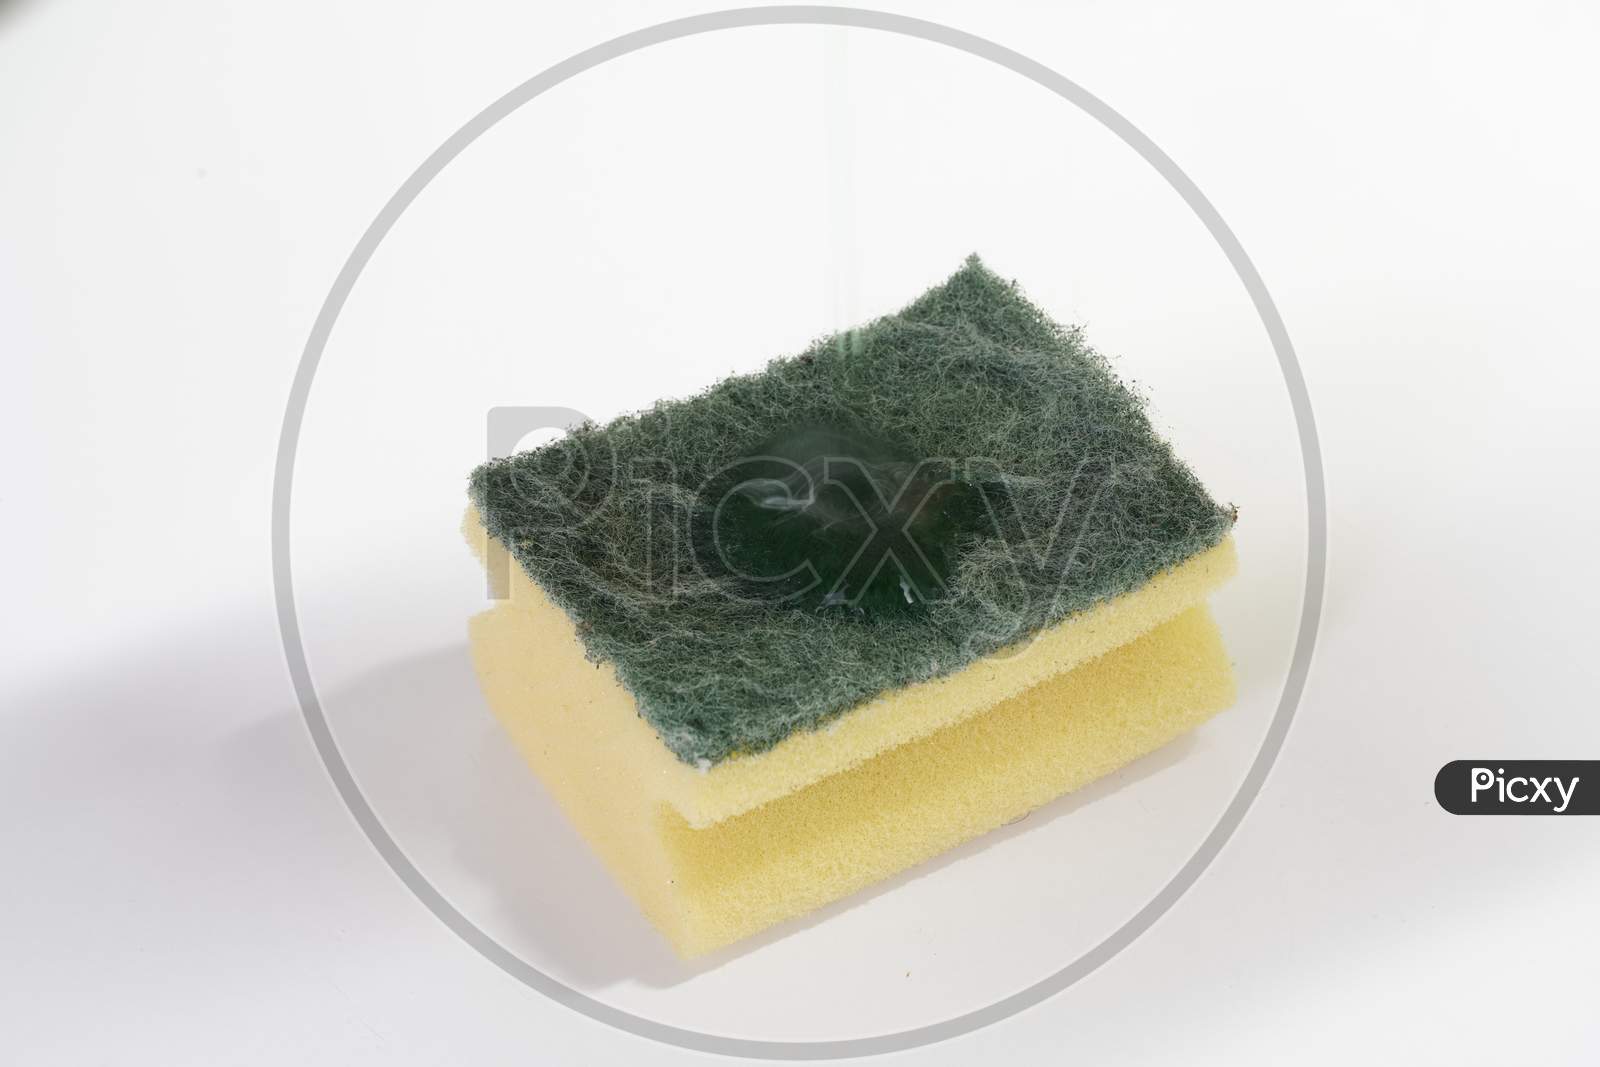 Scouring Pad On White Table With Dish Soap On Top